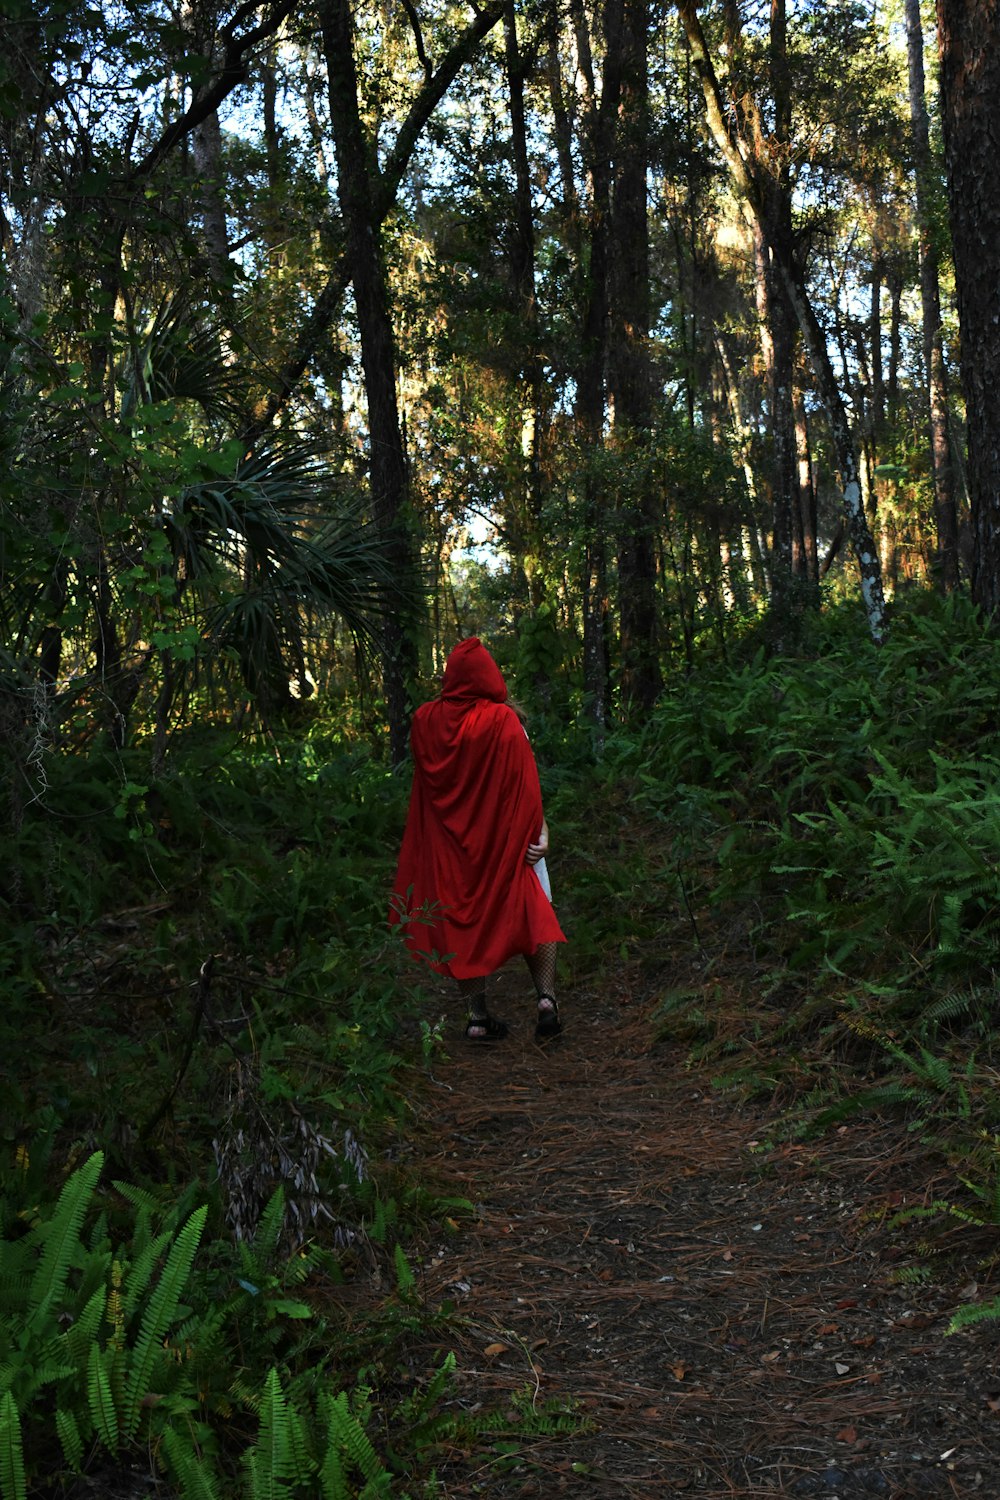 a person in a red cloak walking through a forest